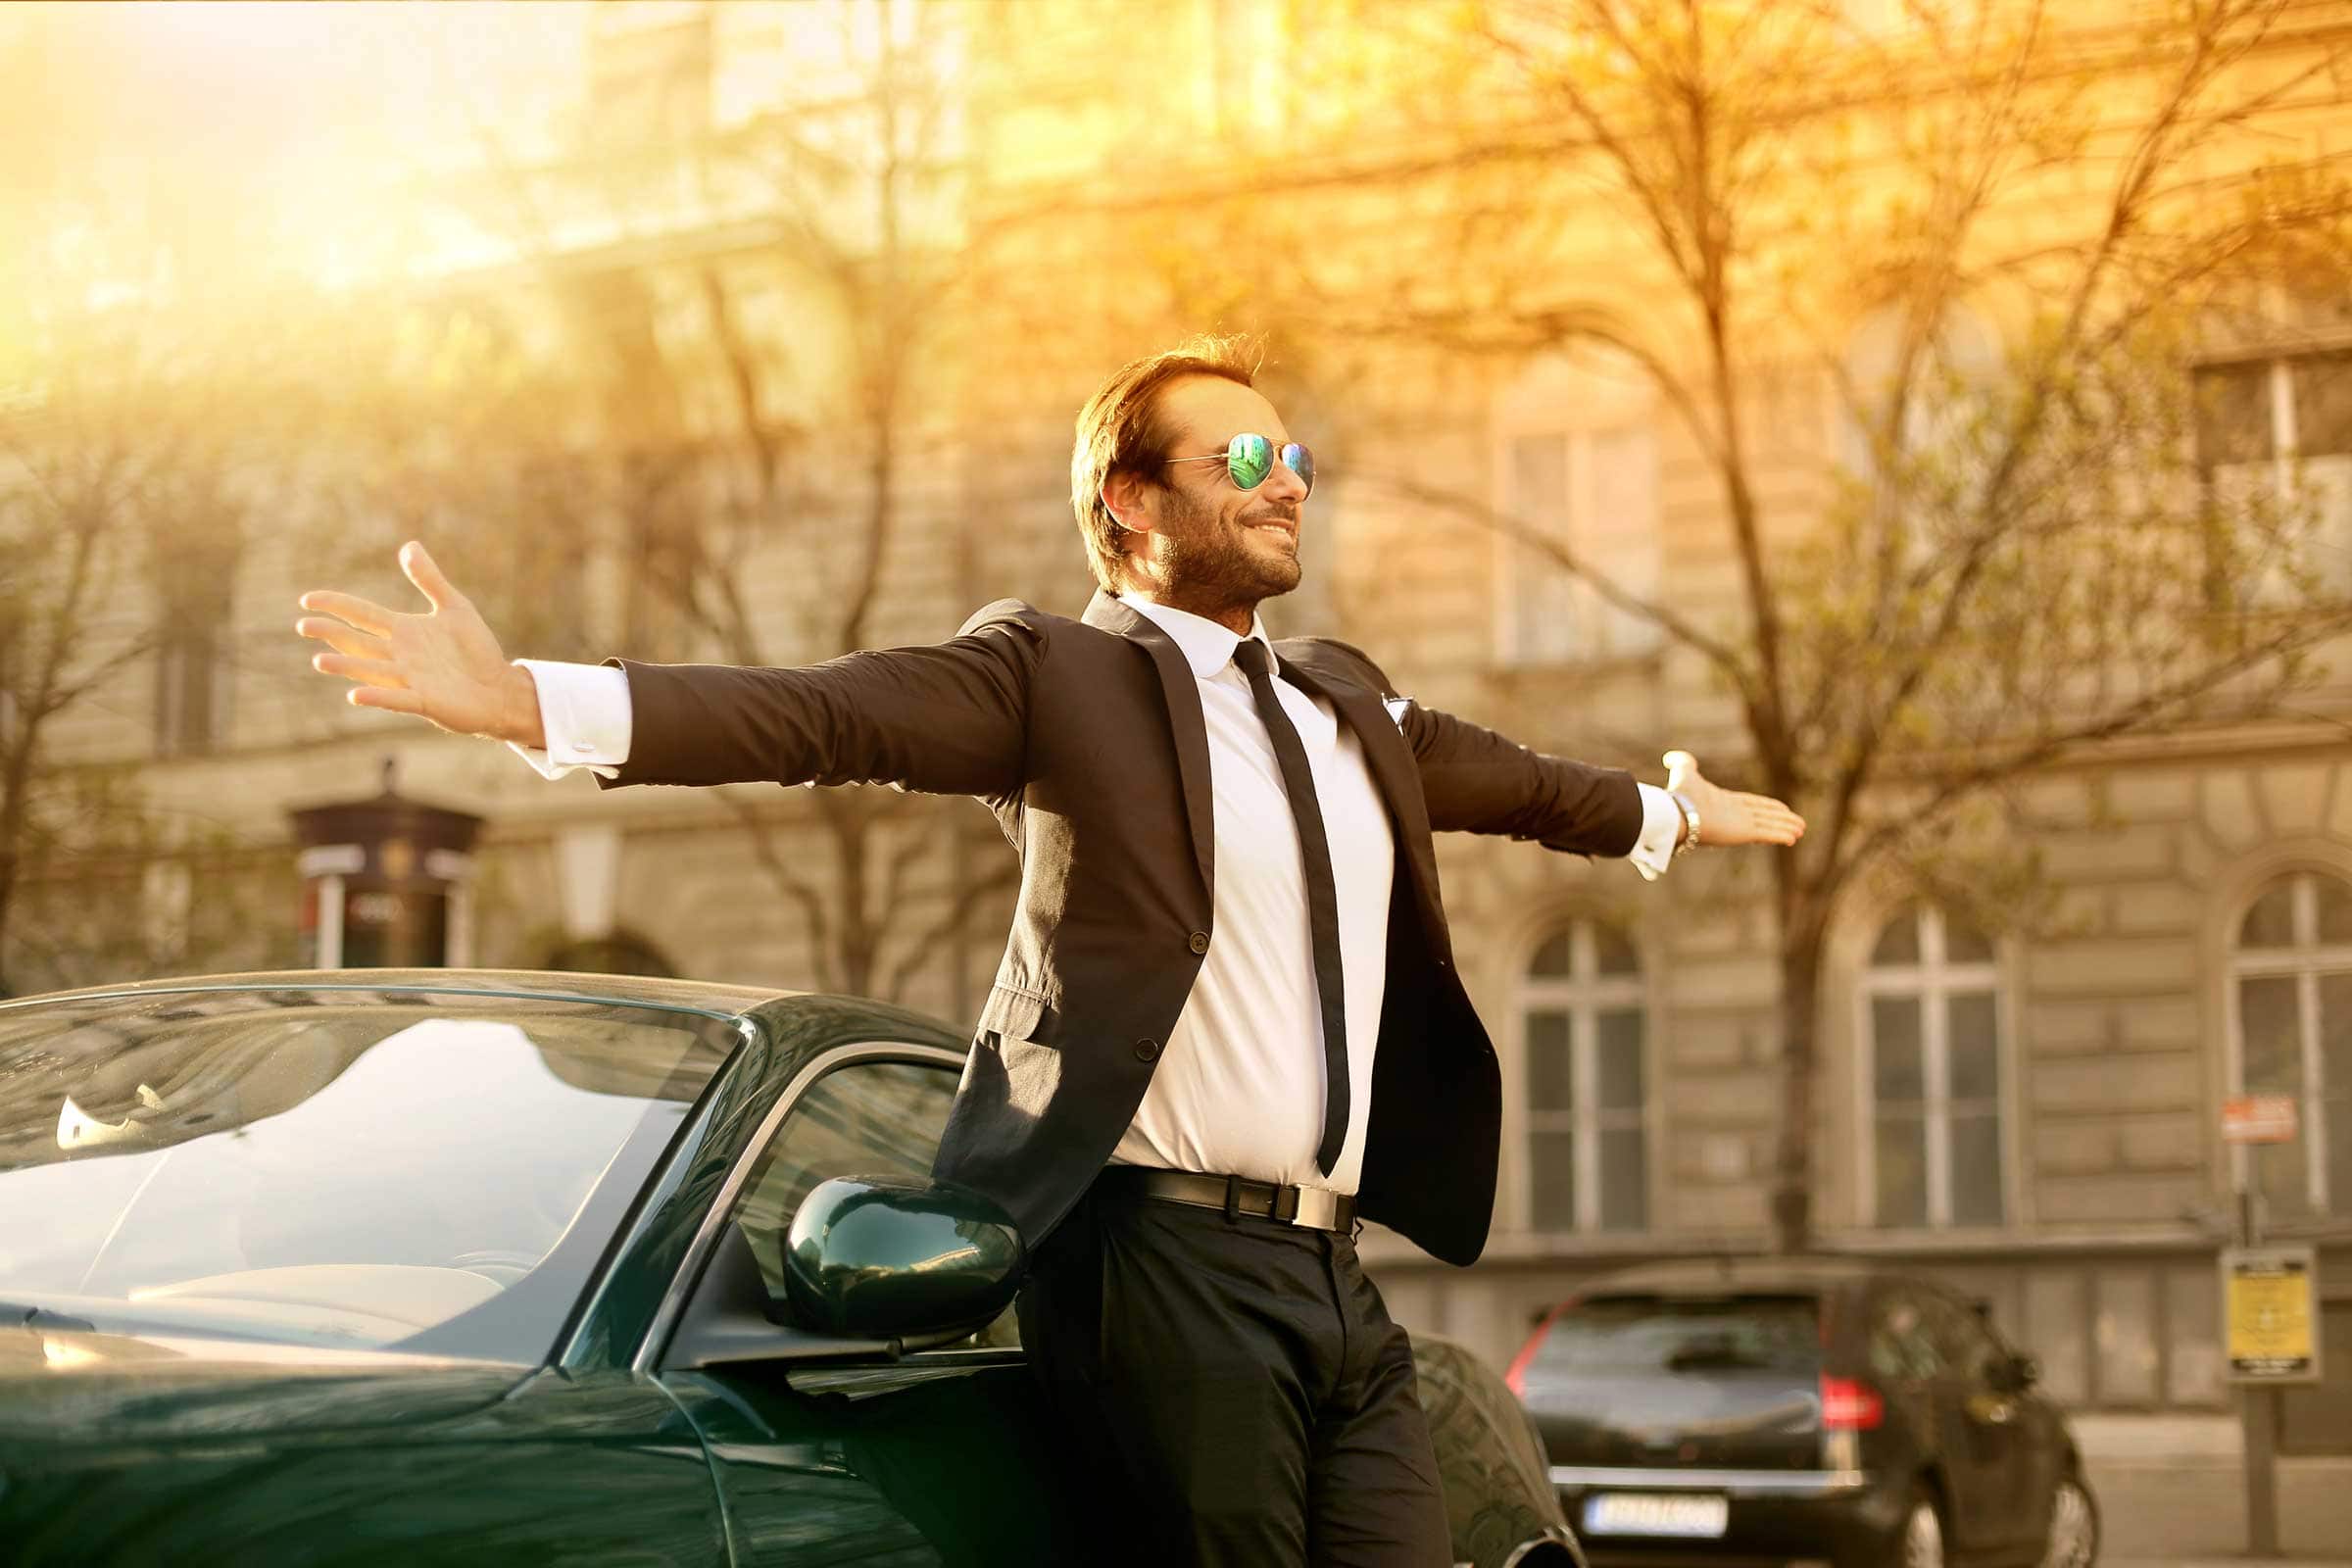 12 Lessons Successful Men Can Teach You That Will Alter Your Thinking